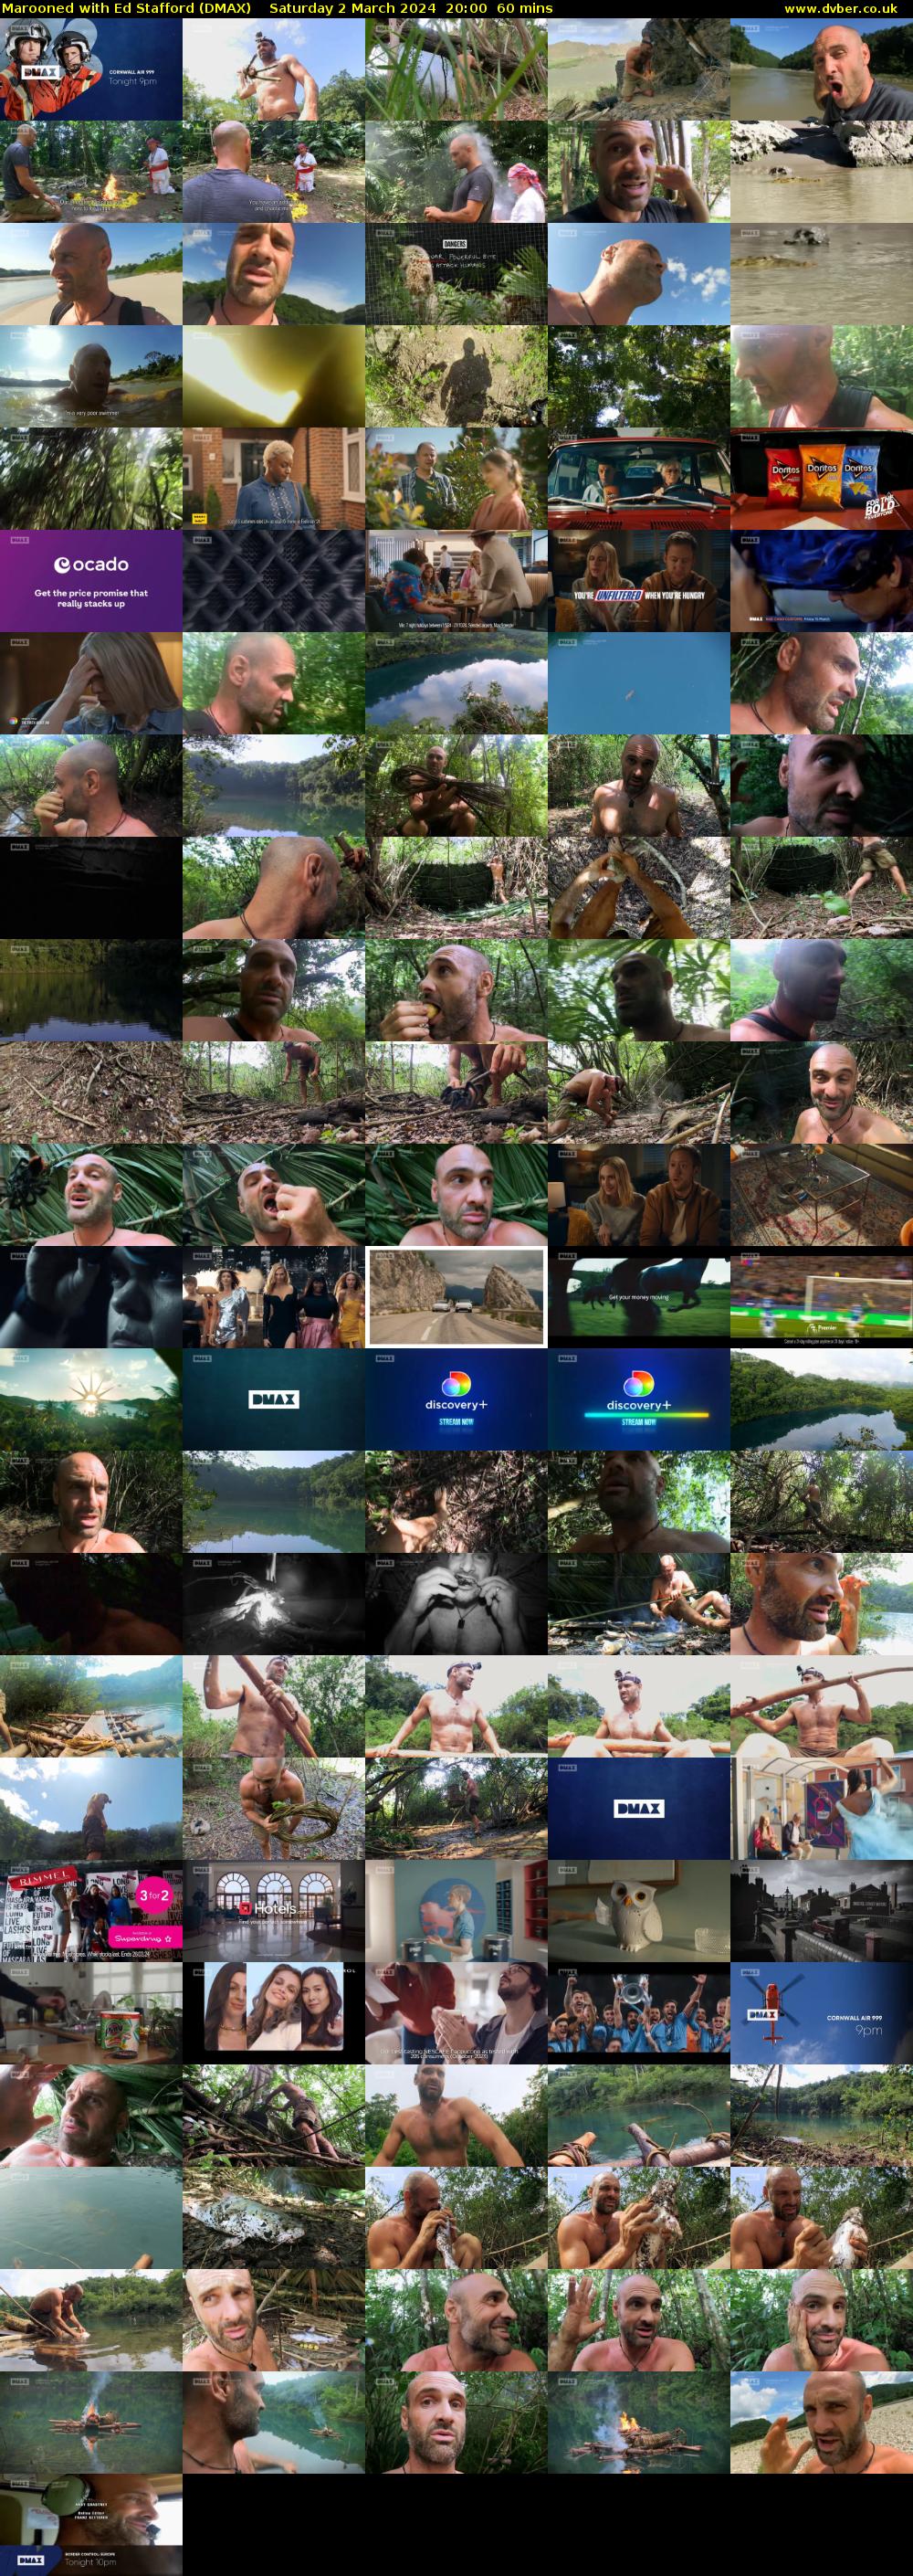 Marooned with Ed Stafford (DMAX) Saturday 2 March 2024 20:00 - 21:00